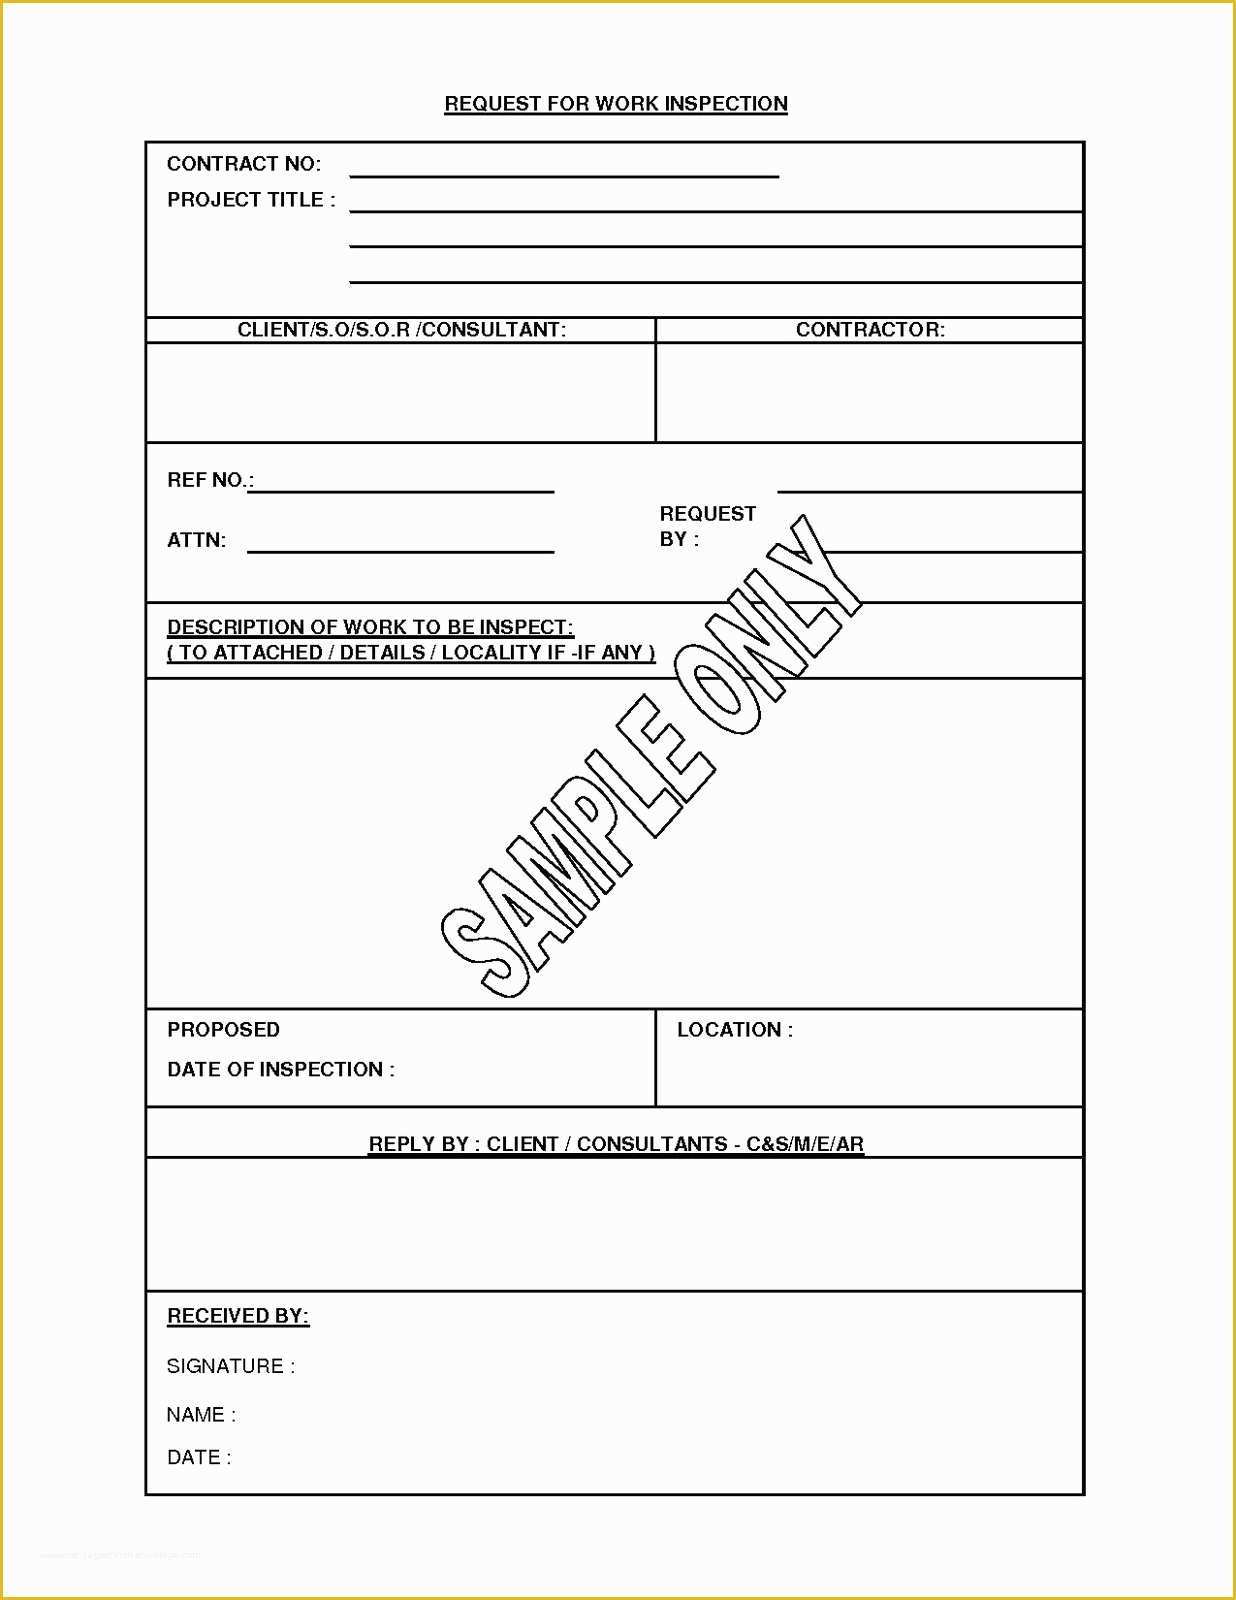 Free Rfi form Template Of Construction Construction Rfi Template with S